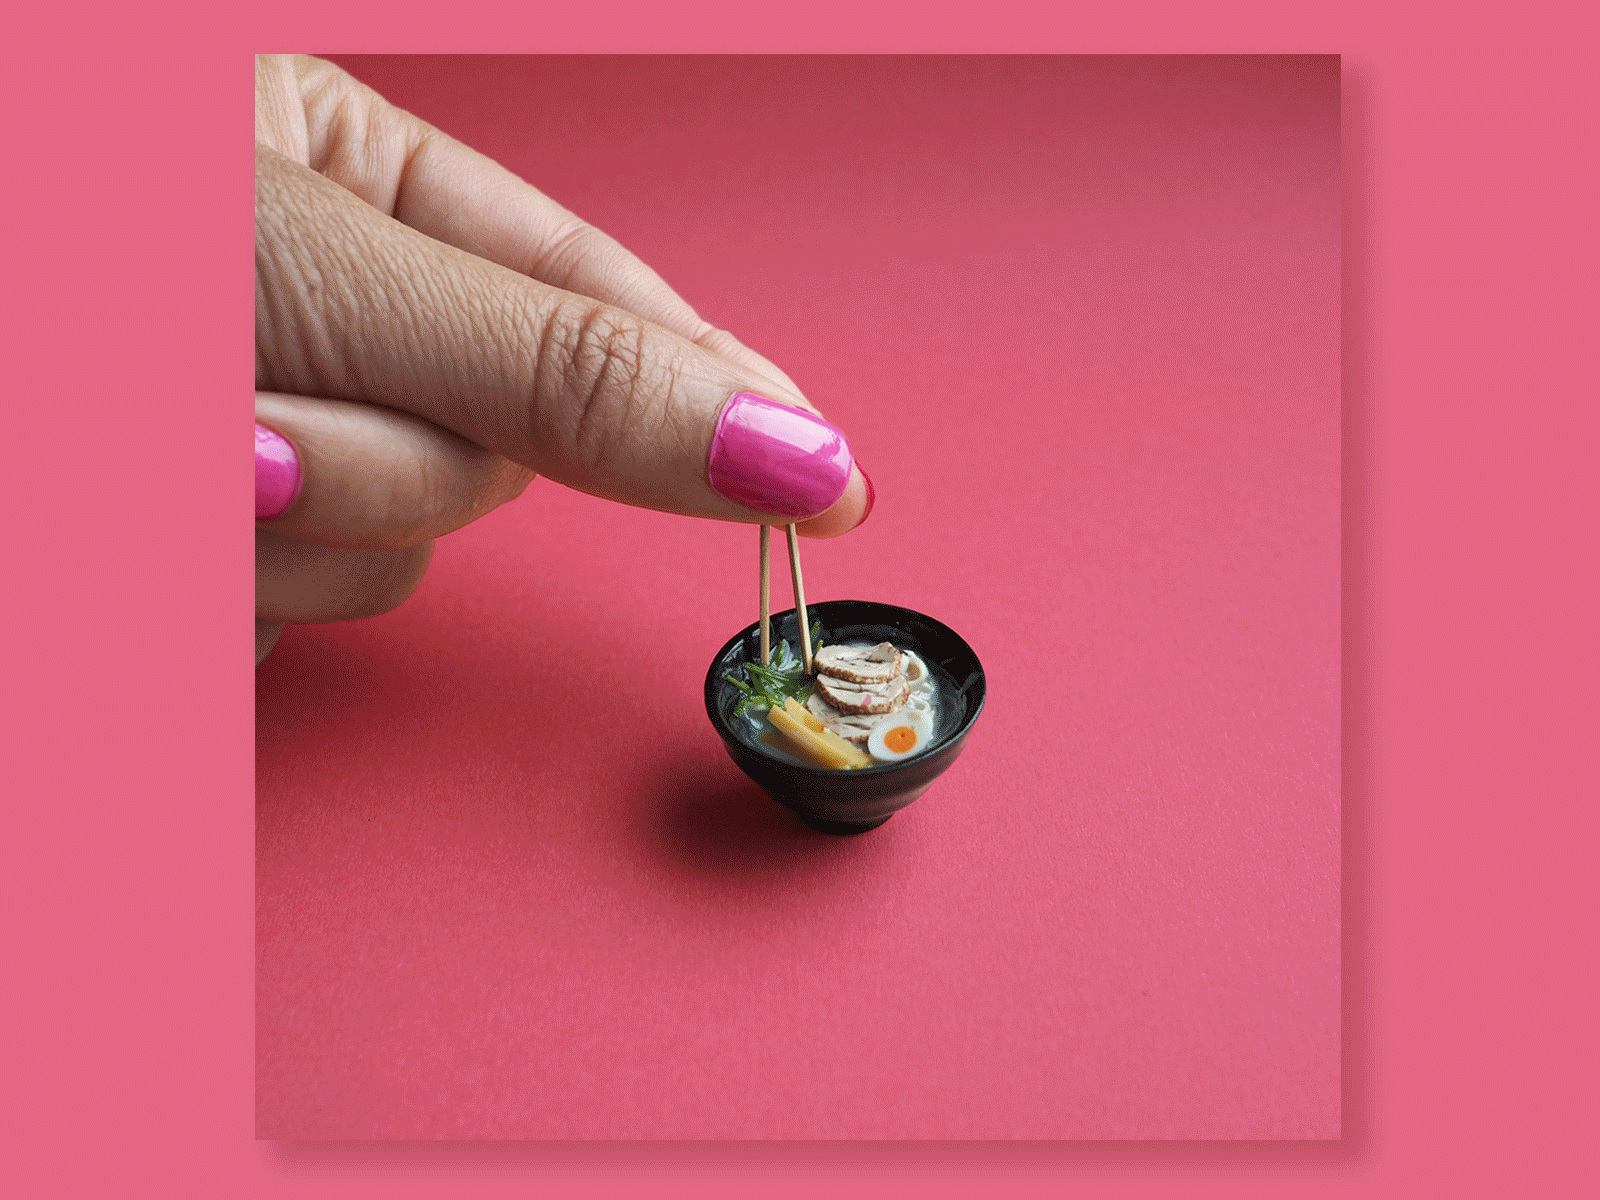 The Tiny Food Campaign